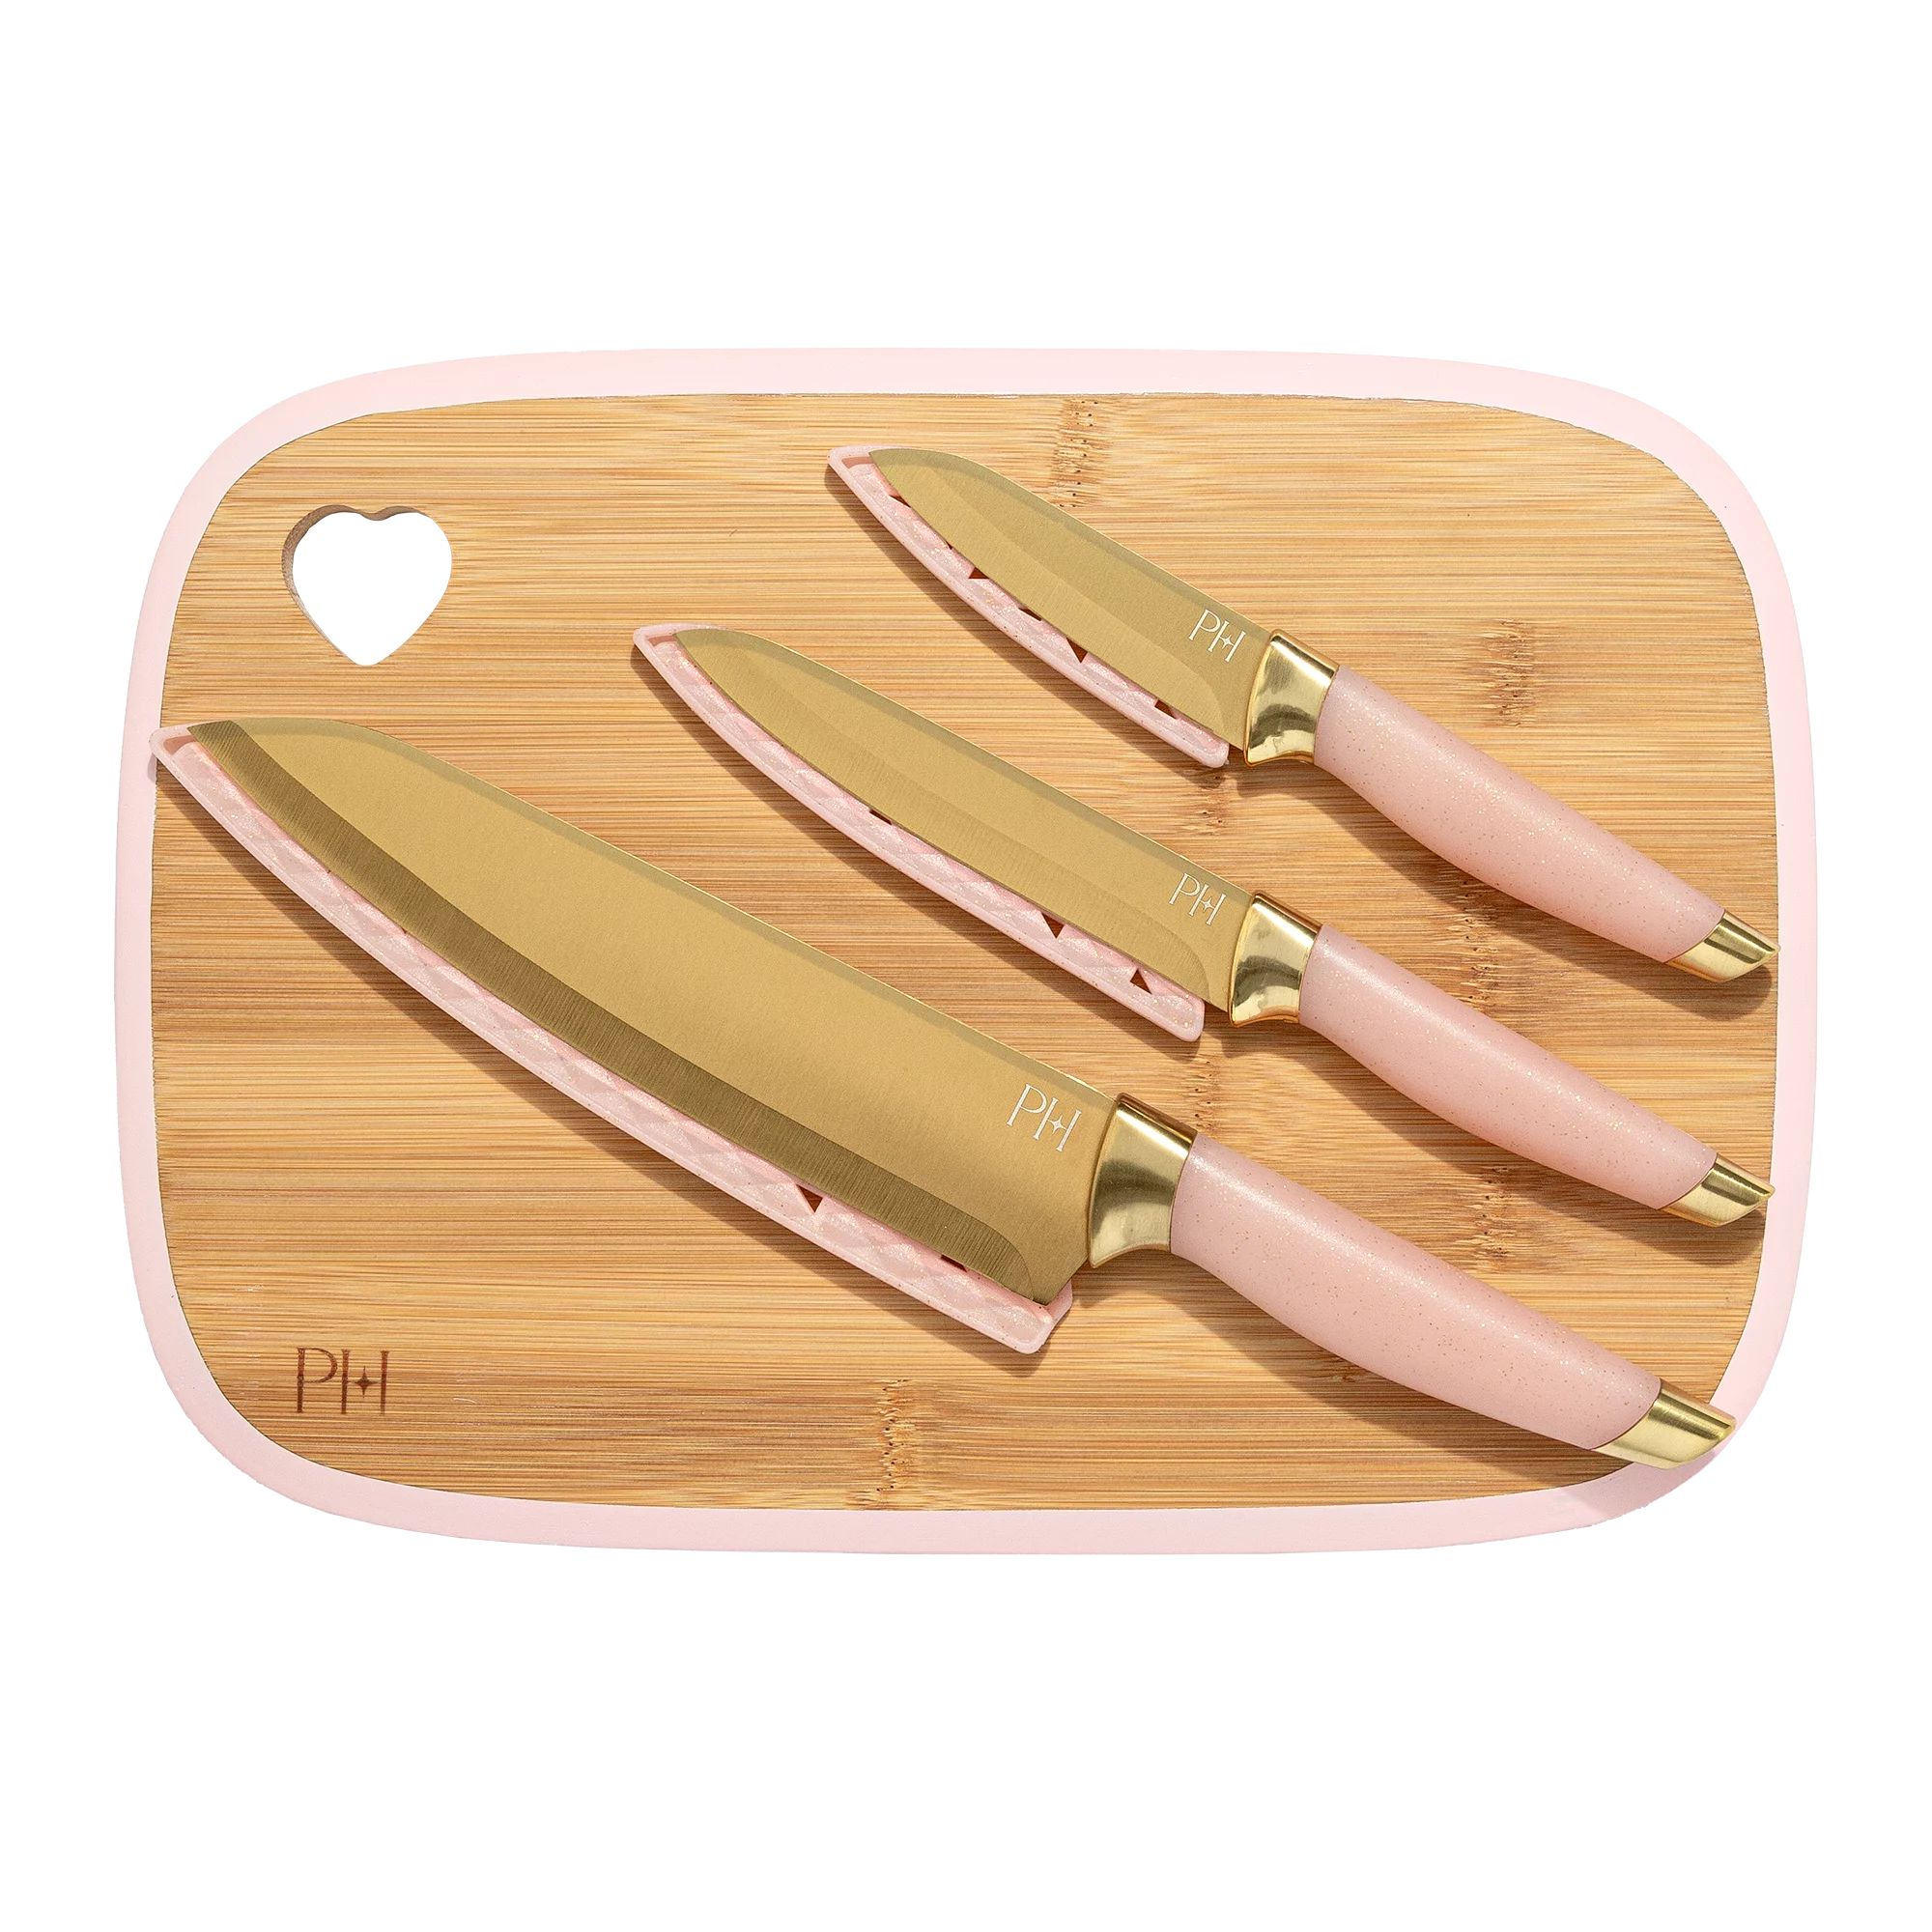 Paris Hilton 7-Piece Reversible Bamboo Heart Cutting Board and Stainless Steel Cutlery Set, Pink | Walmart (US)